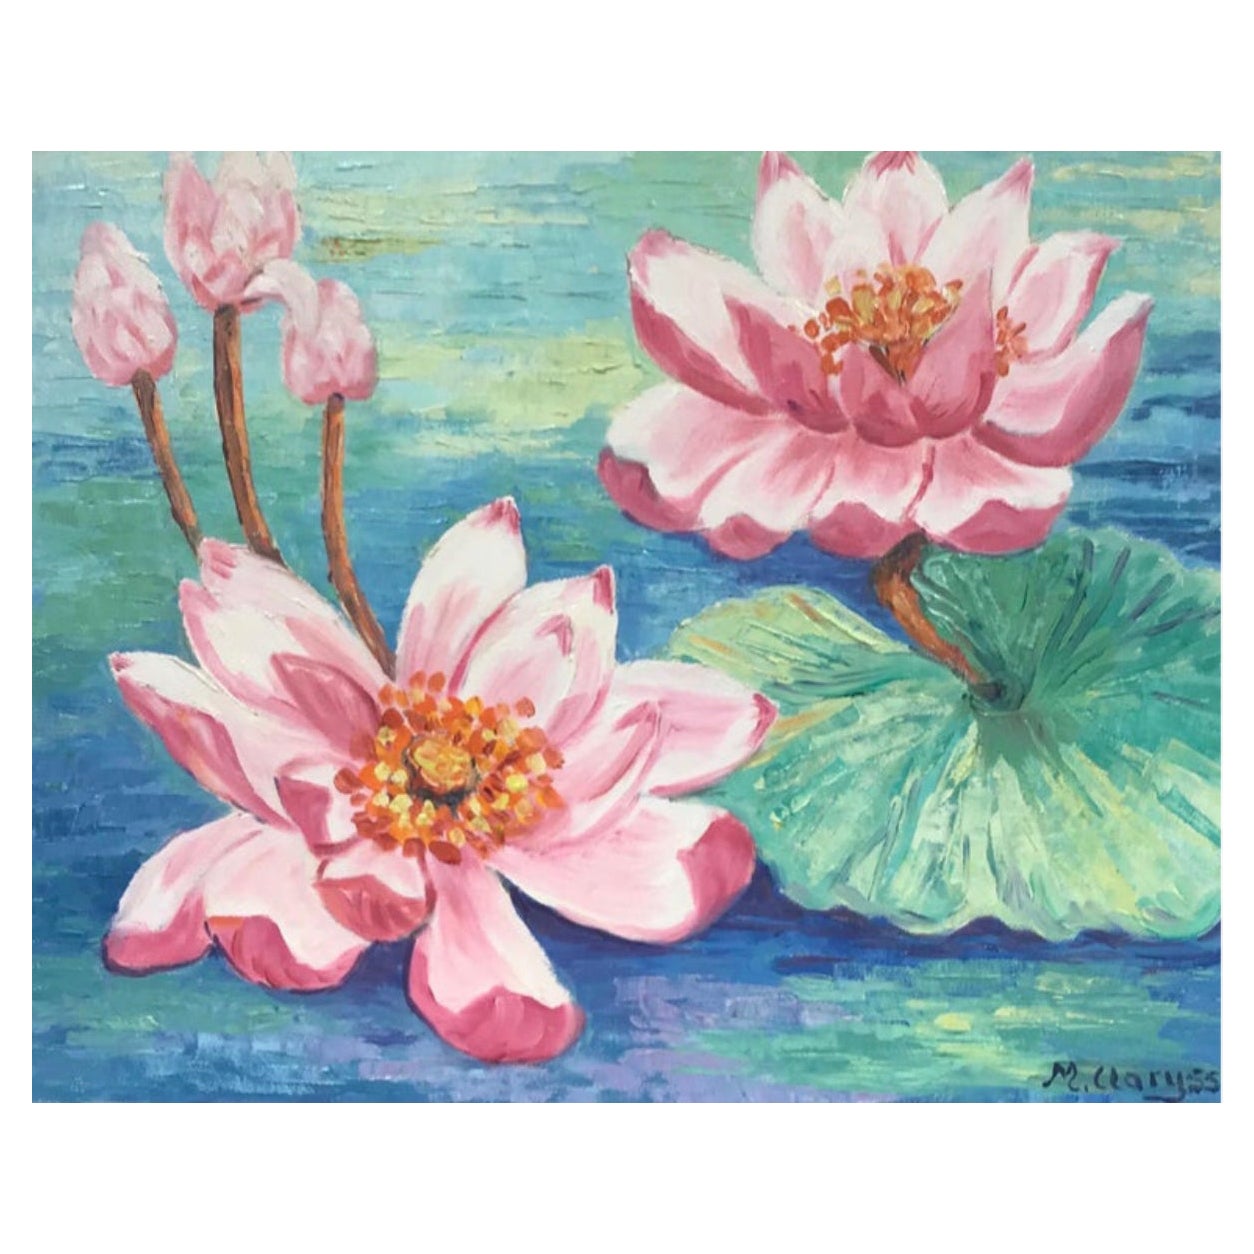 Bright and Colourful Vibrant Pink Lillies on Lily Pad